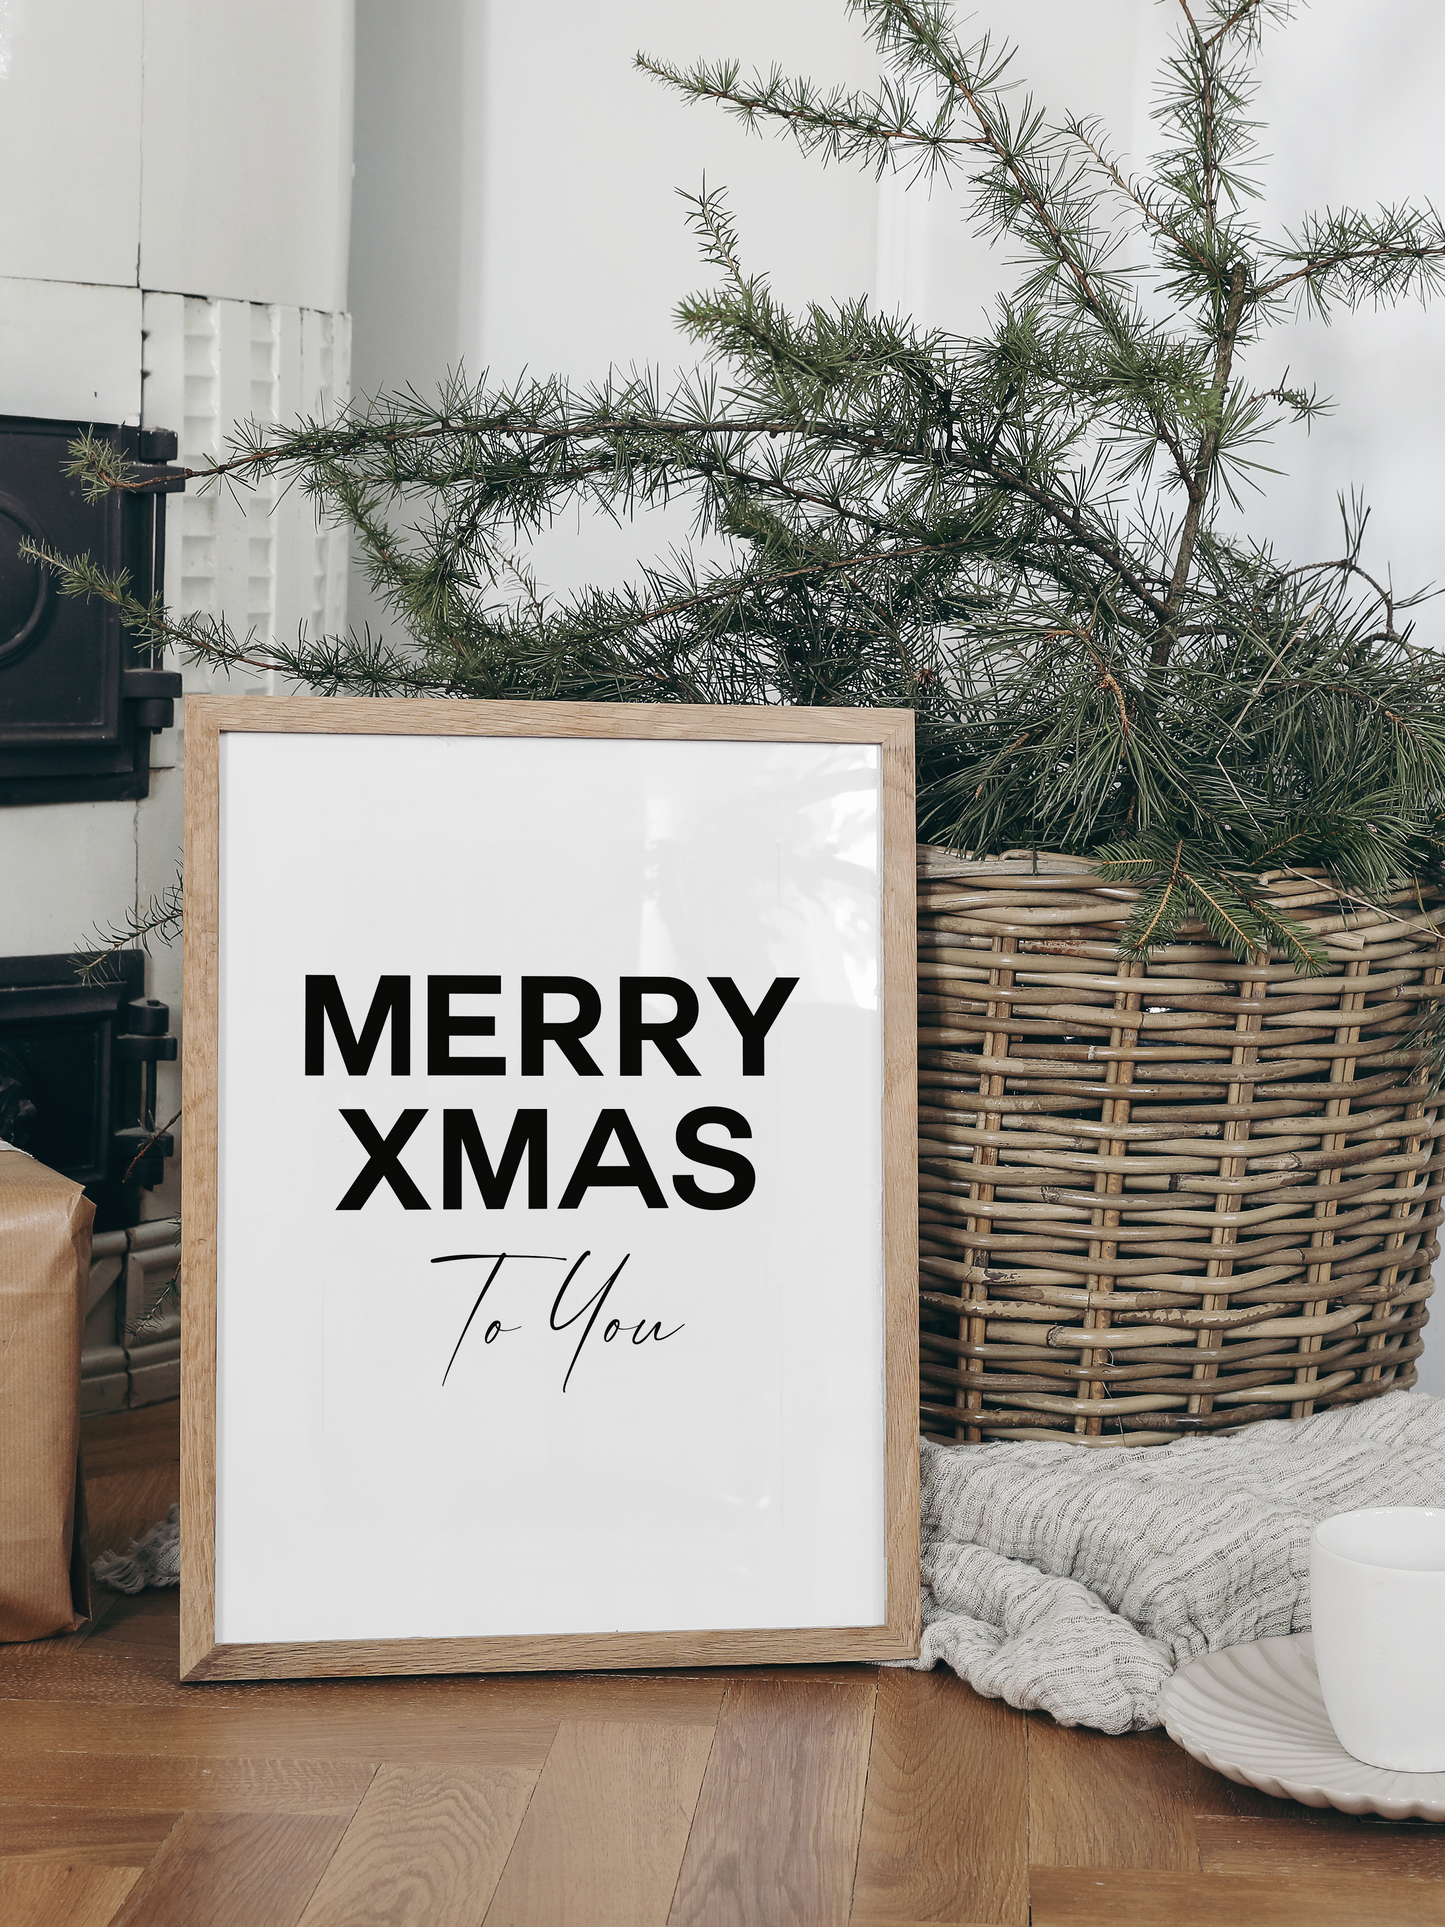 MERRY XMAS TO YOU POSTER